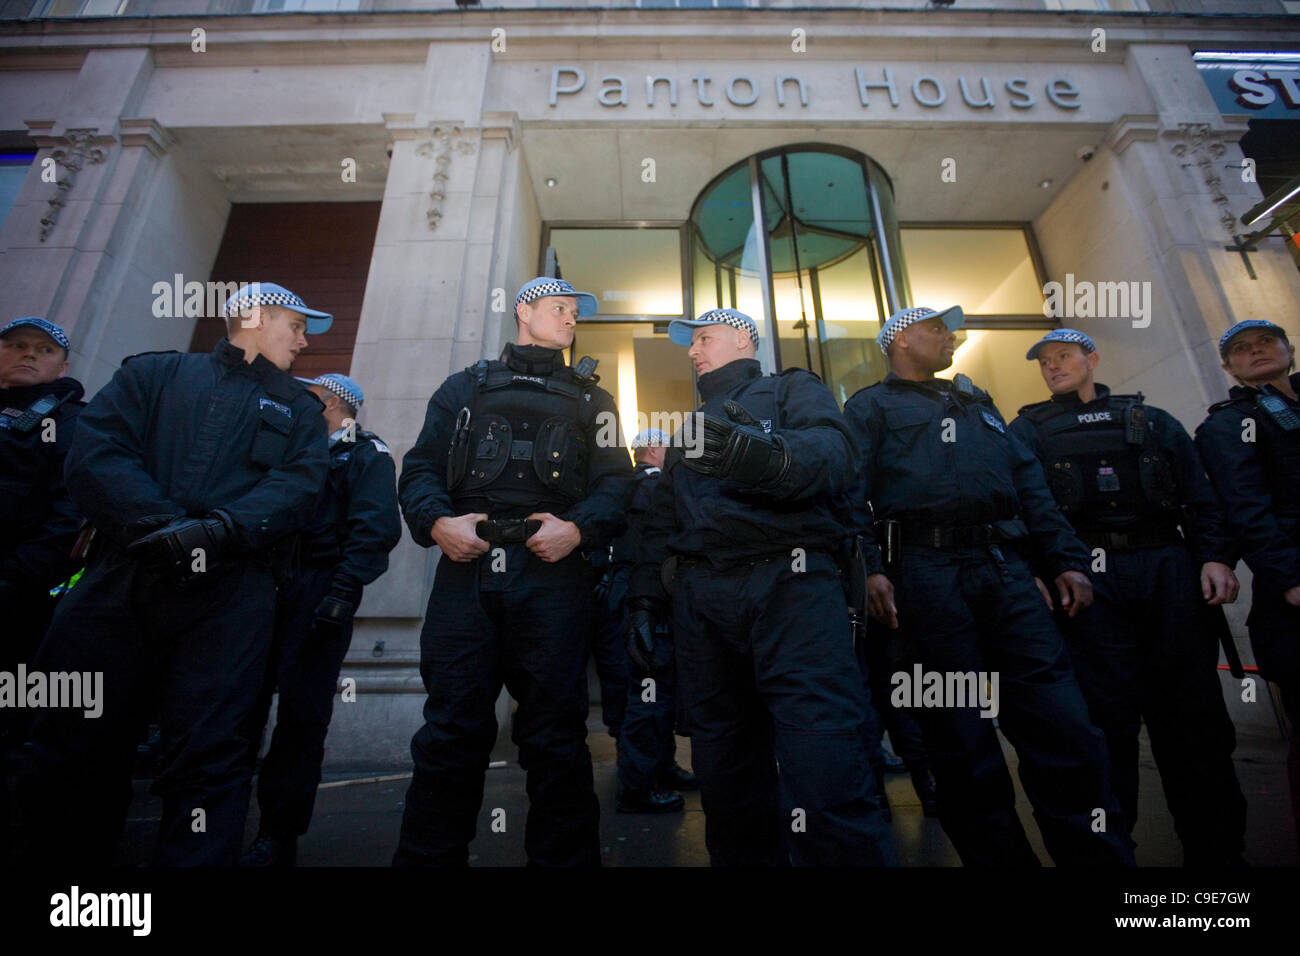 Haymarket, London, 30th Nov, 2011. Police officers guard the entrance to Panton House, off Haymarket, London, as protesters are arrested on the roof of the building. The occupation followed the Public Sector demonstrations in London. Stock Photo